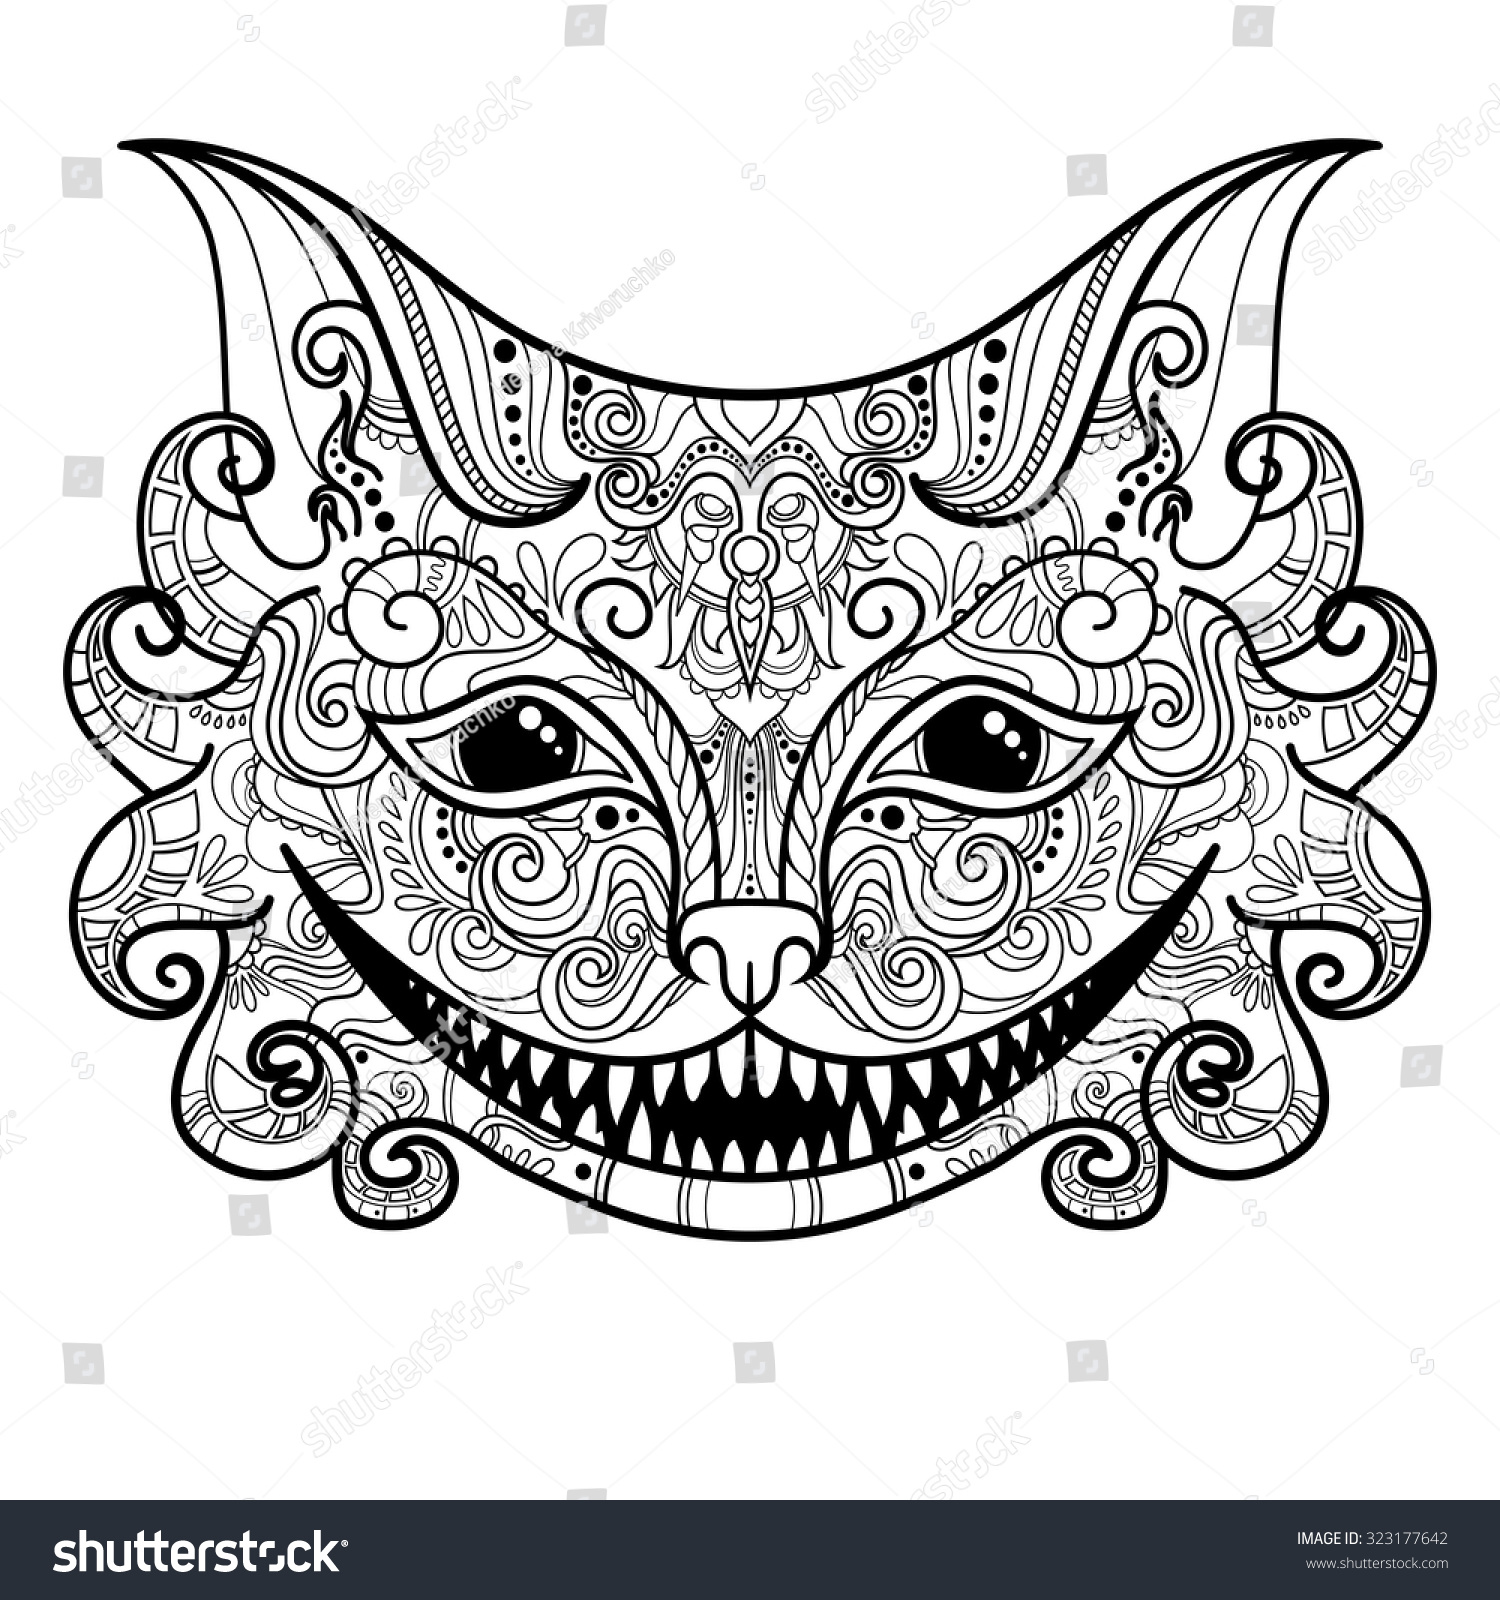 SVG of Vector Decorative Cheshire Cat. Isolated Fictitious Animal On White Background. Zentangle Style svg